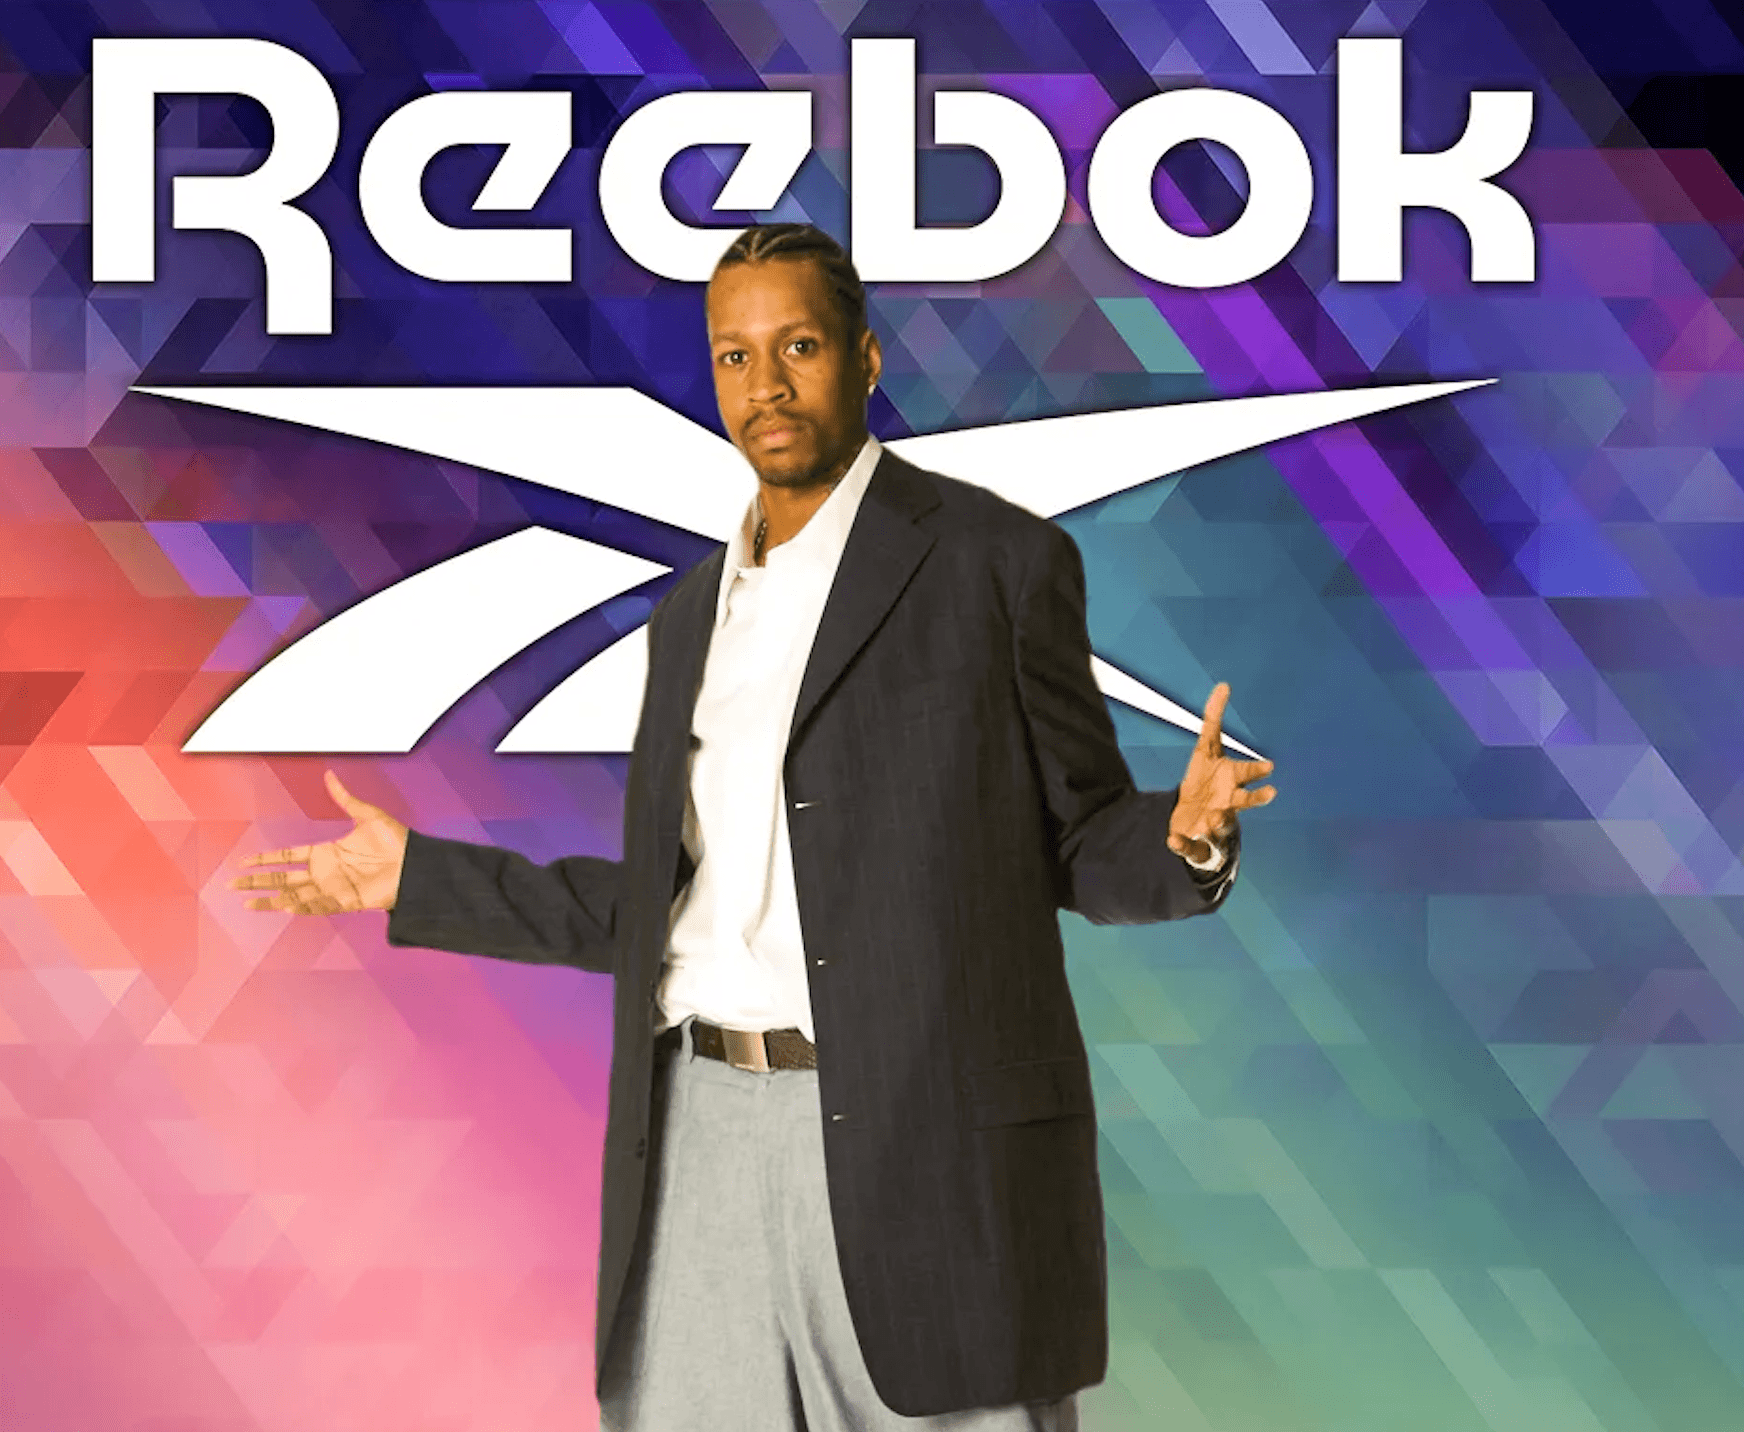 I know Reebok had a two year contract with the NBA but I didn't